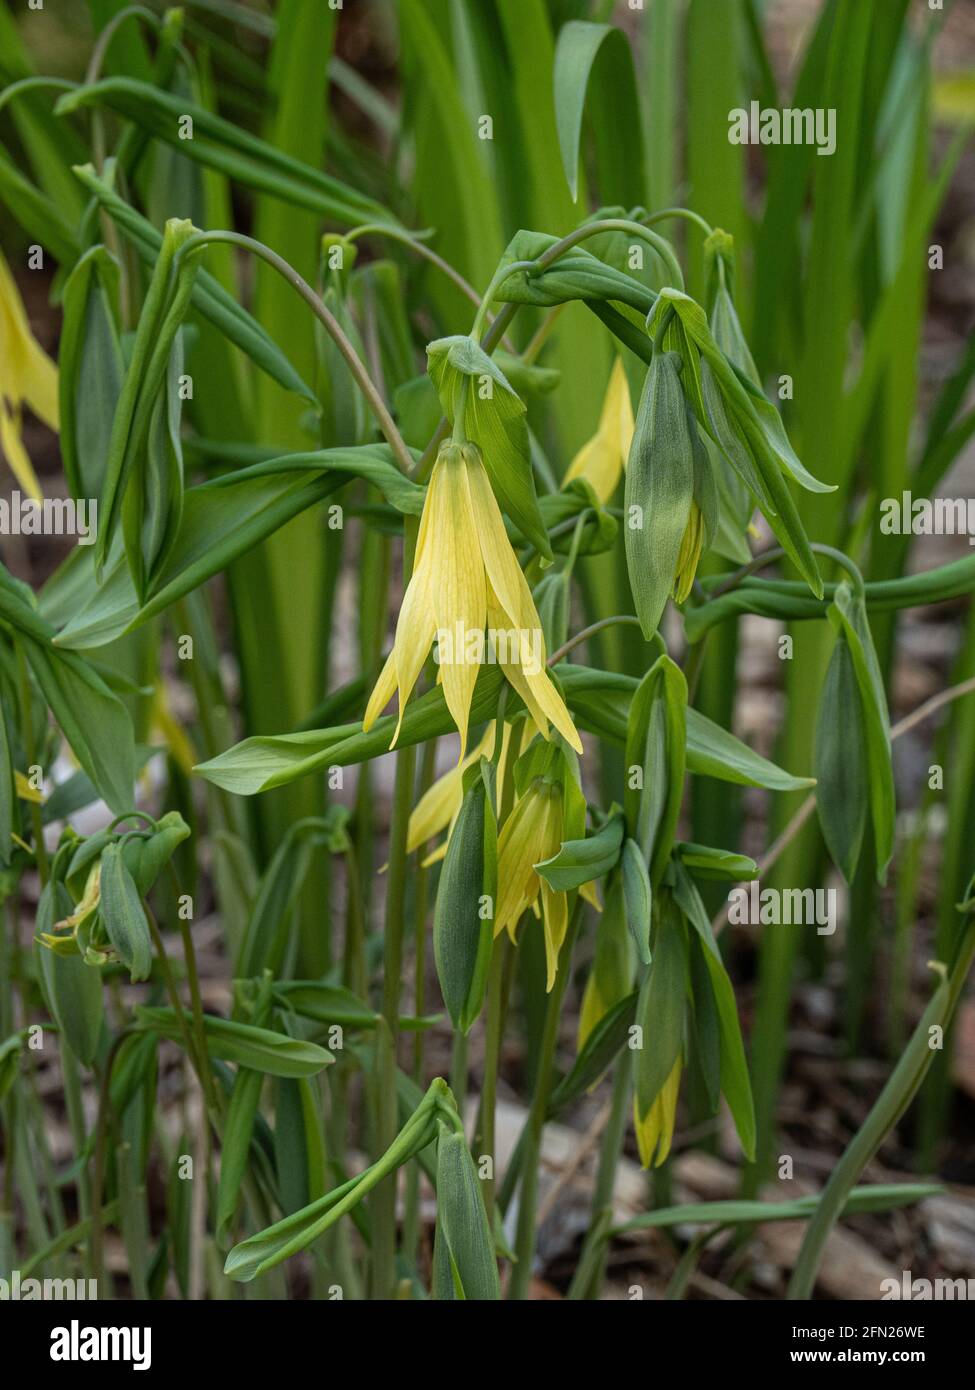 A clump of the upright green foliage and hanging pale yellow bells of Uvlaria perfoliata taller form Stock Photo